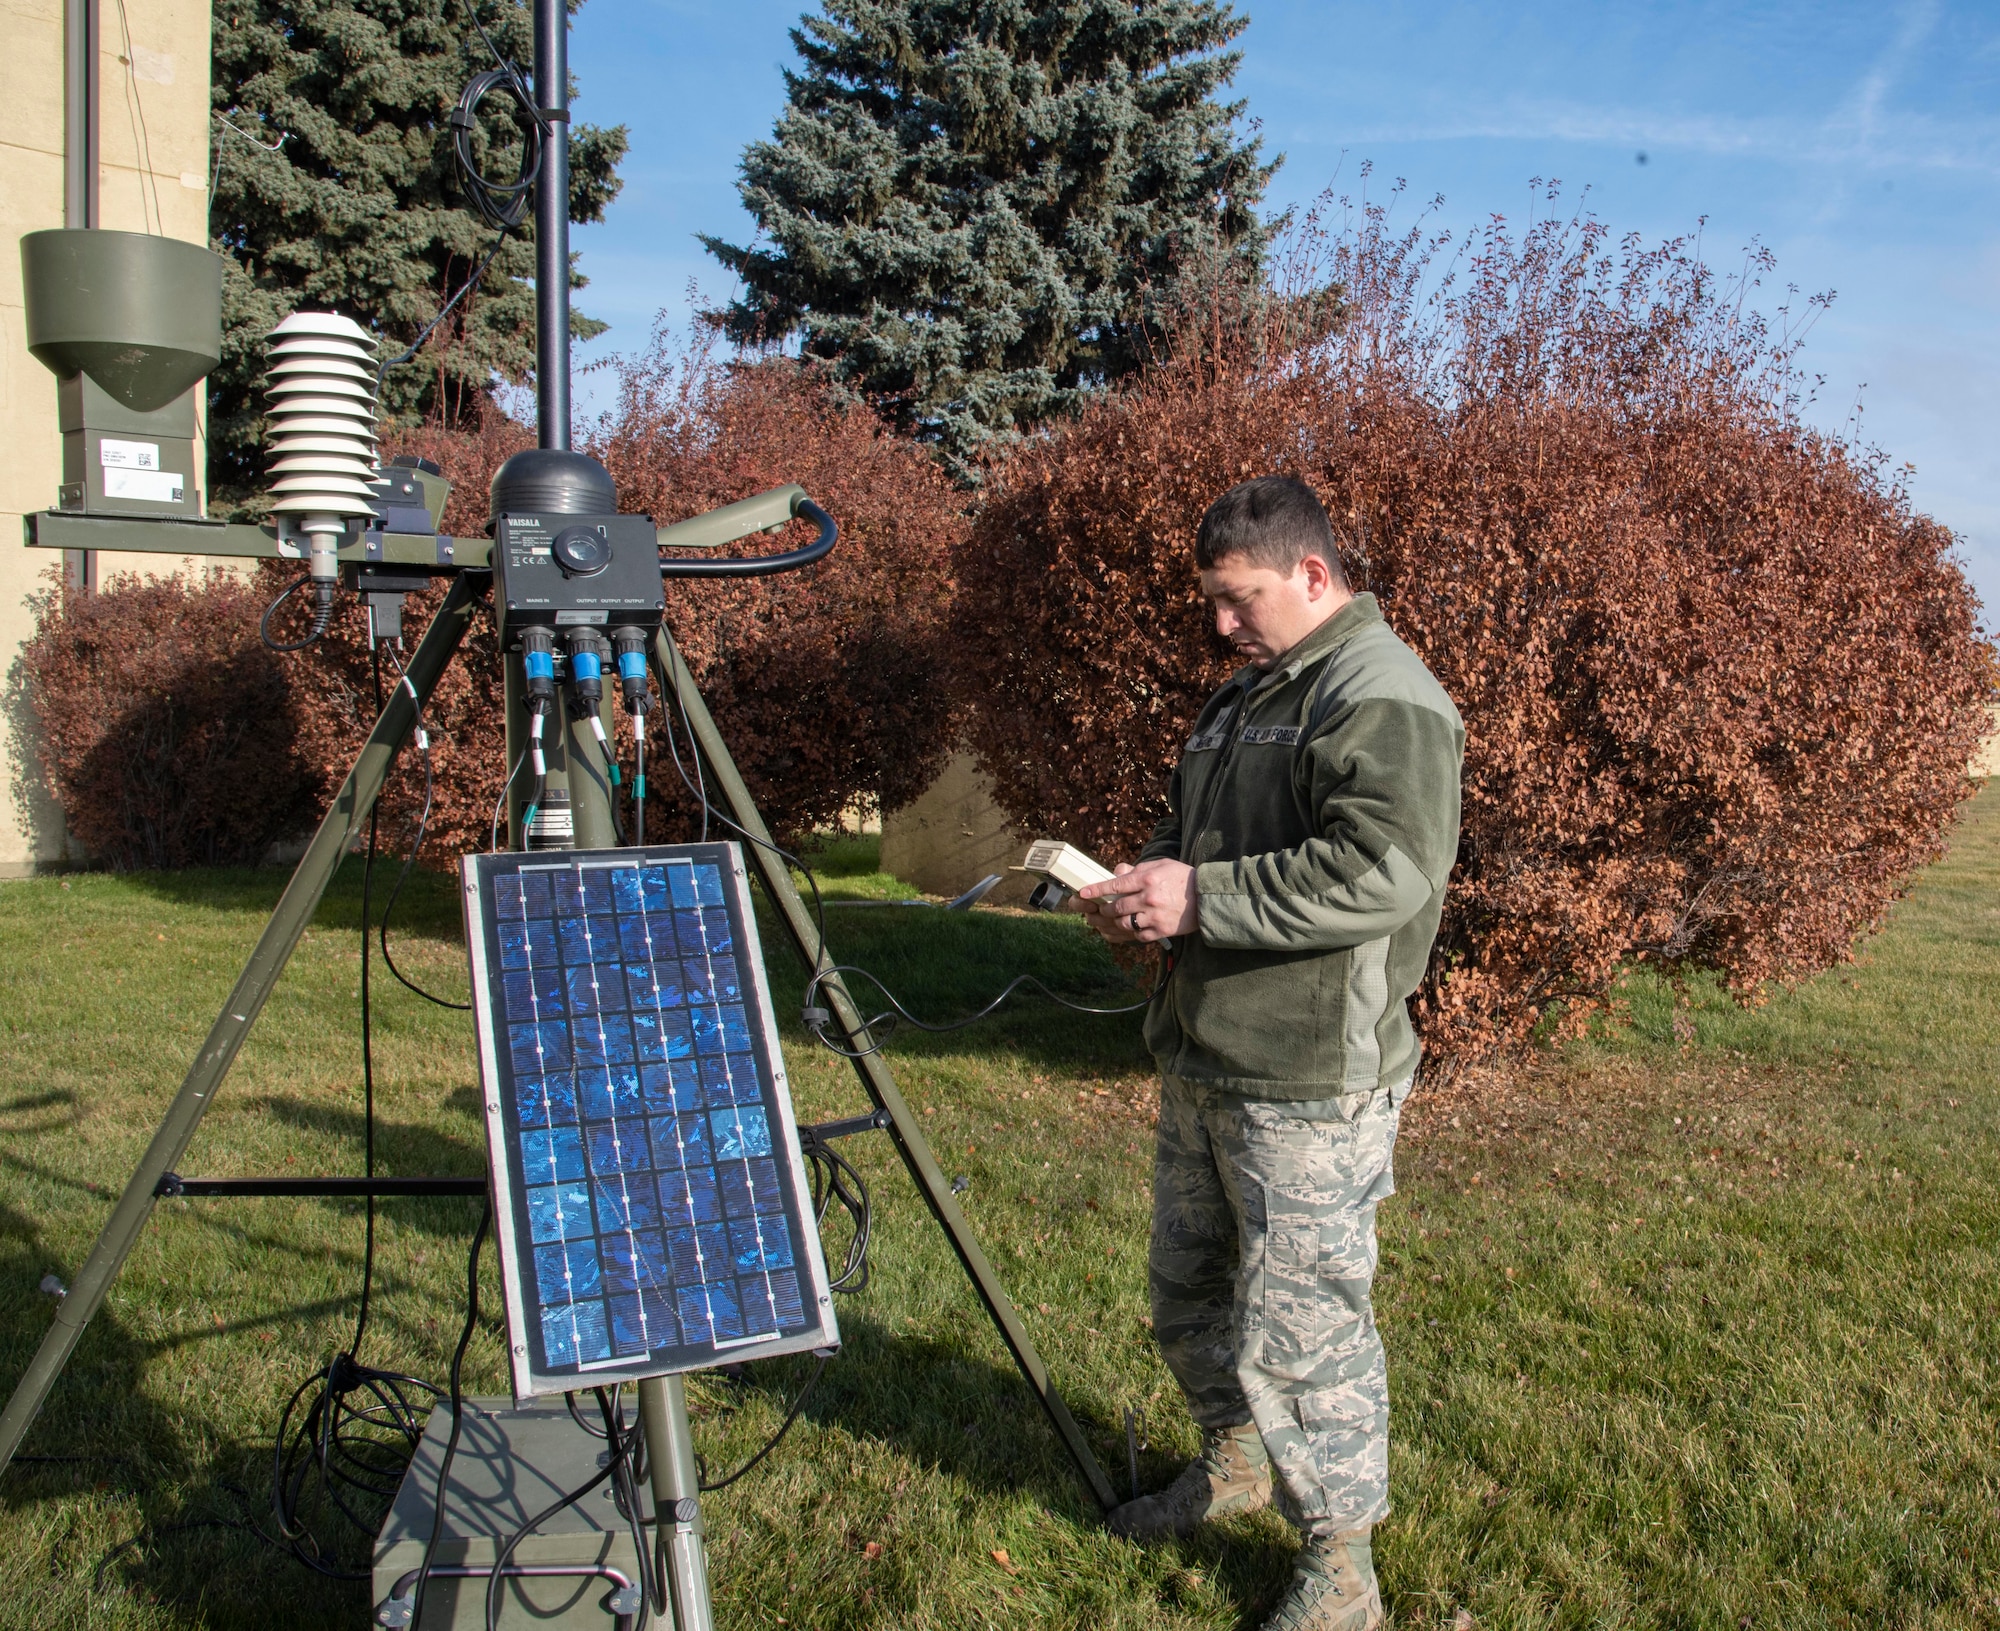 U.S. Air Force Tech Sgt. Johnny McGuire, 92nd Operational Support Squadron weather forecaster, looks at the main data display on the TMQ-53 weather sensor at Fairchild Air Force Base, Washington, Nov. 14, 2019.